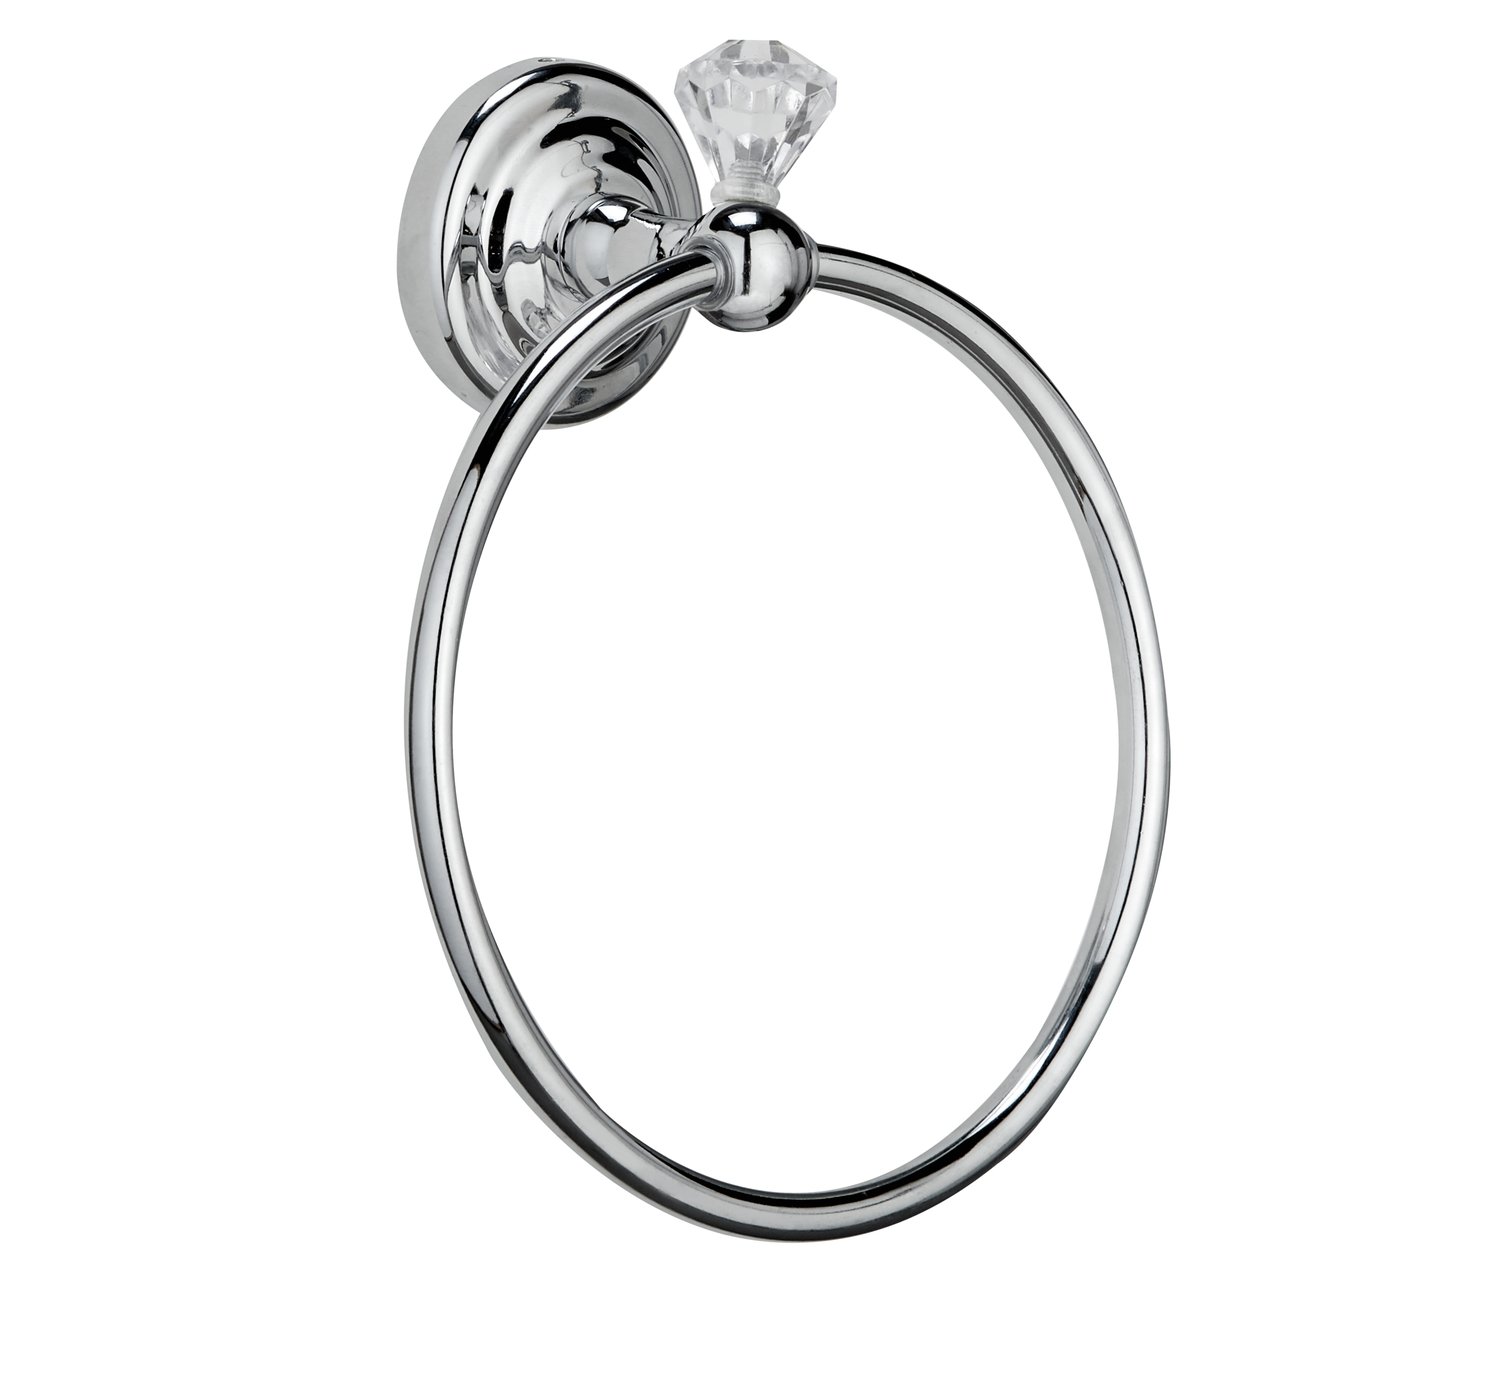 Argos Home Gem Wall Mounted Towel Ring - Alloy